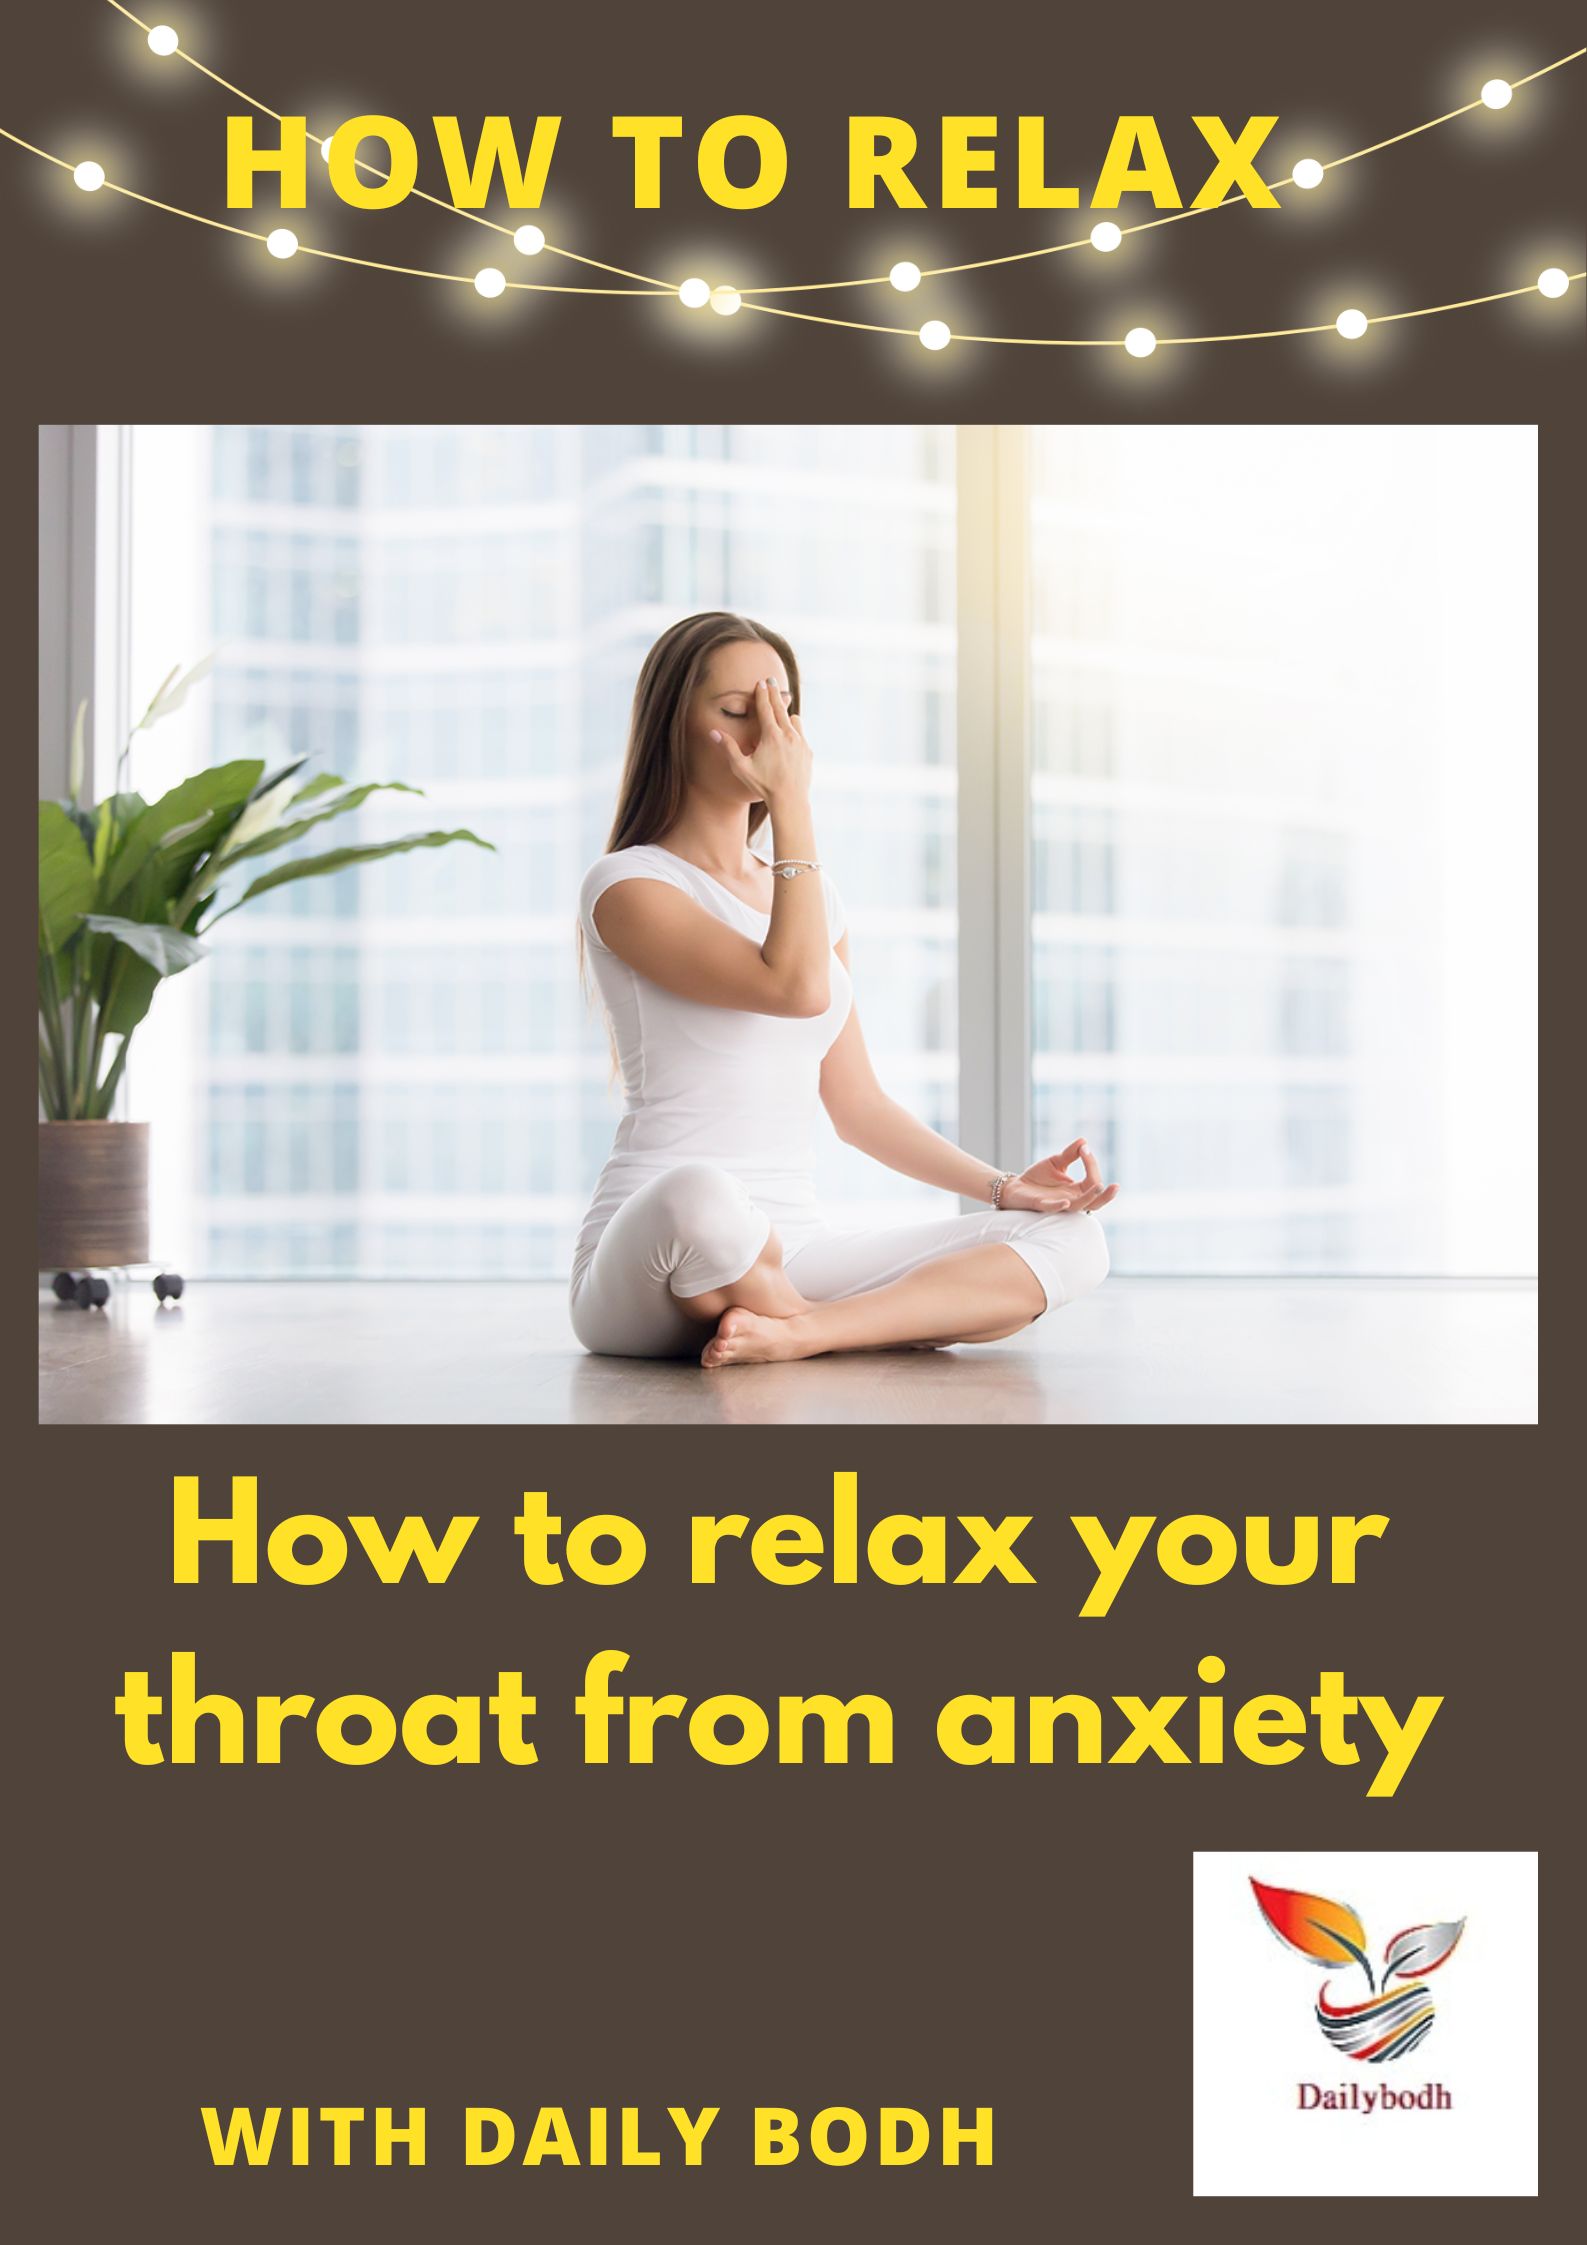 How to relax your throat from anxiety (How to relax)